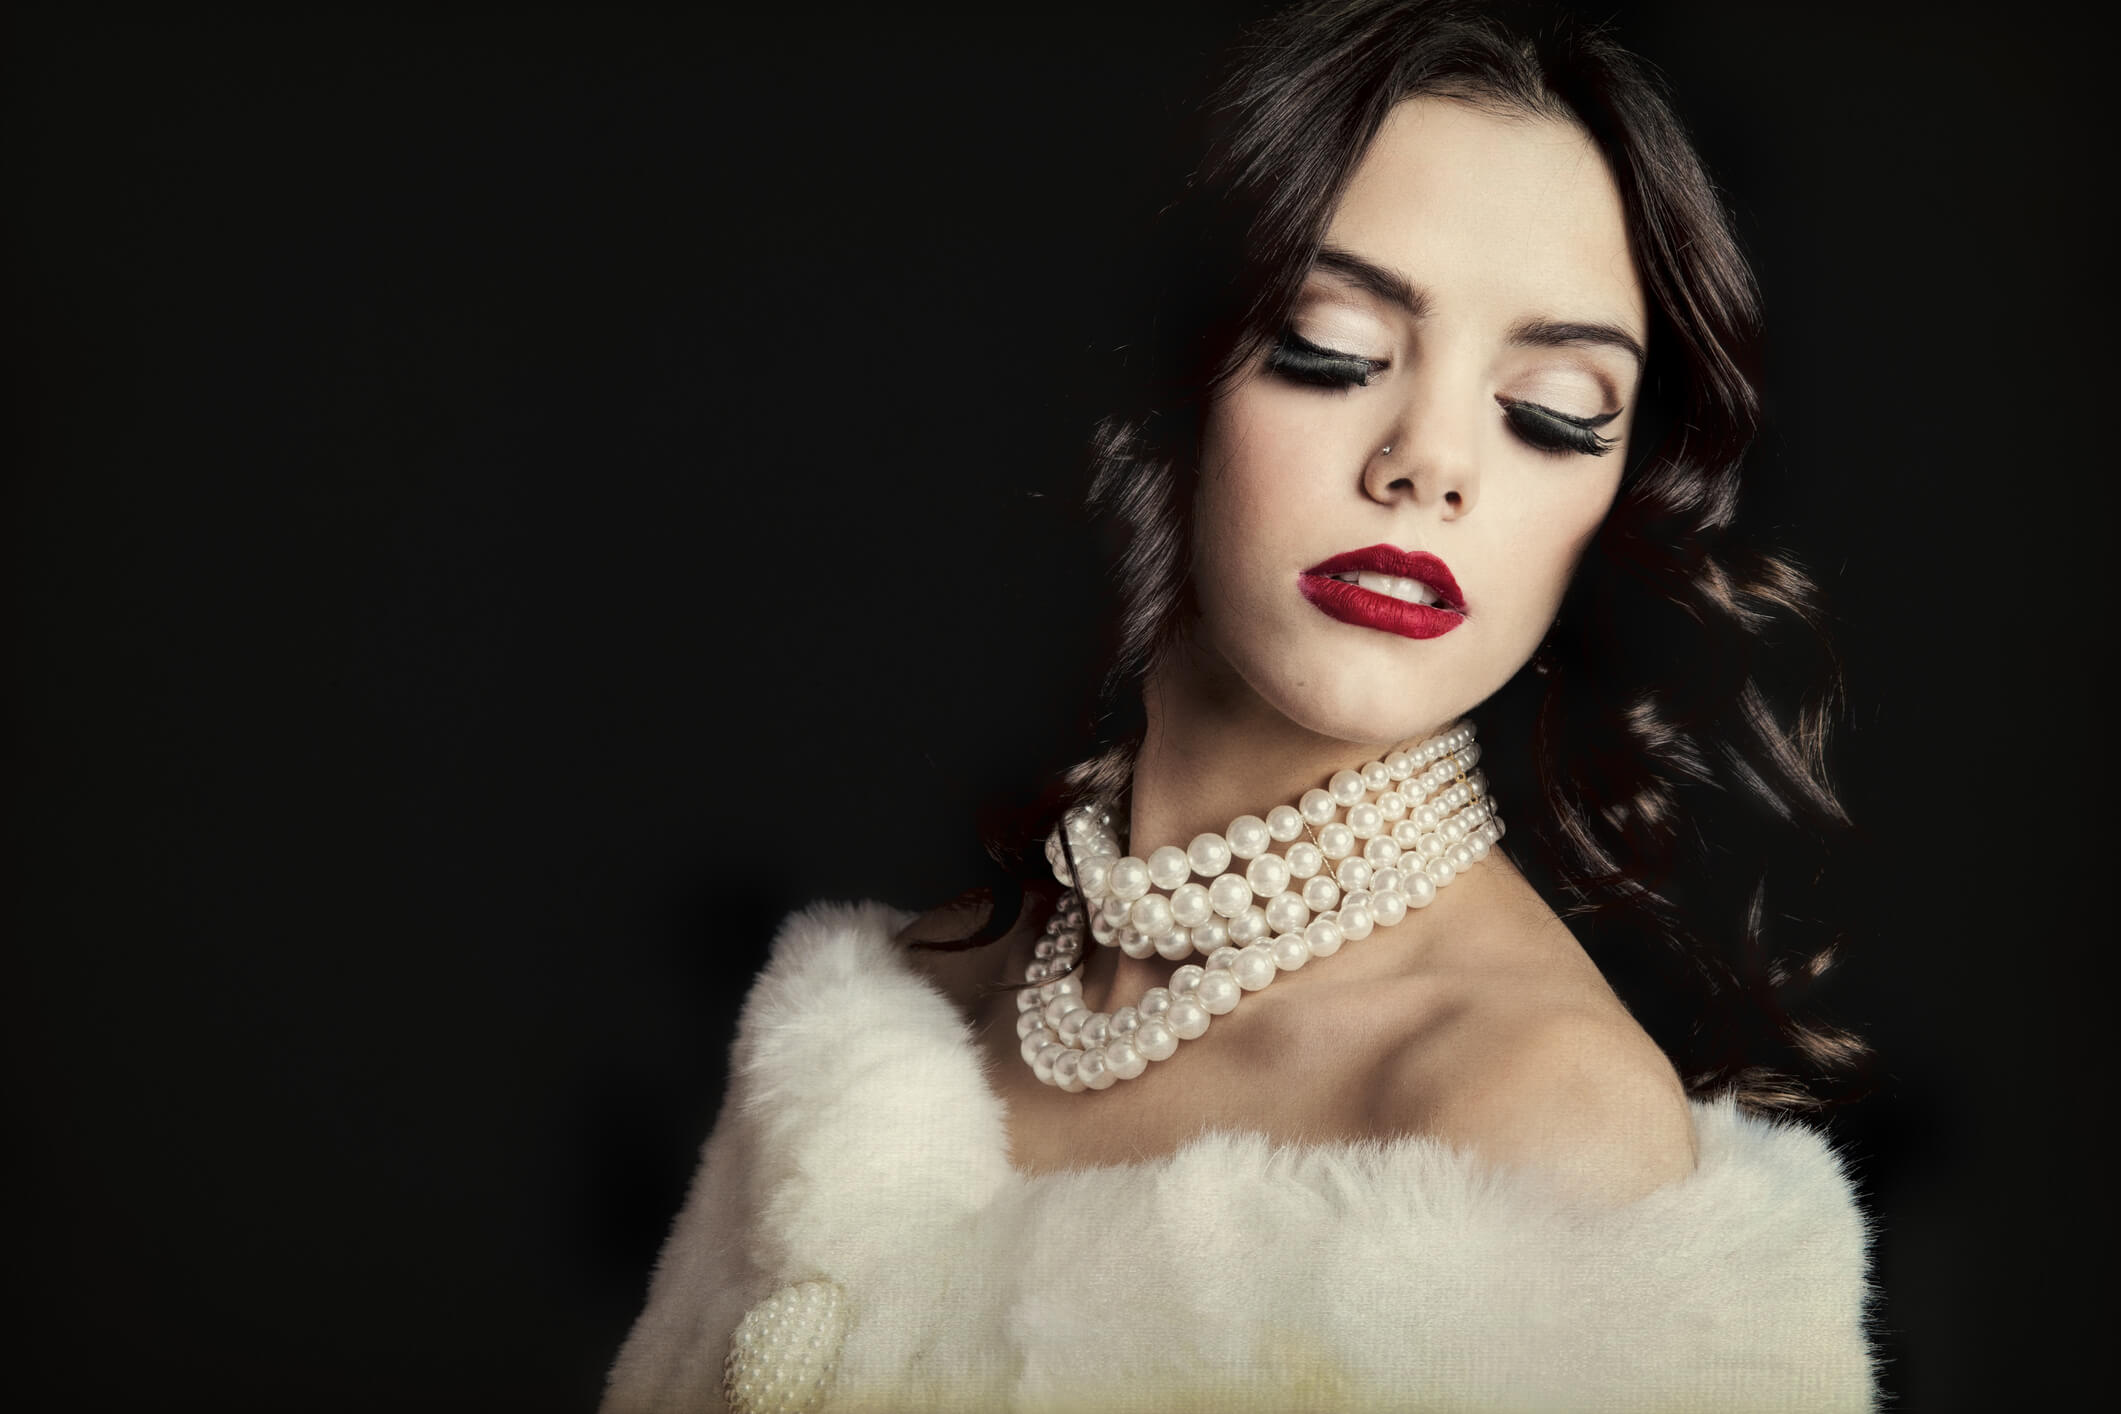 photo-hollywood-glam-classic-starlet-white-fur-stole-classic-pearl-necklace-bright-red-lipstick-shot-black-background